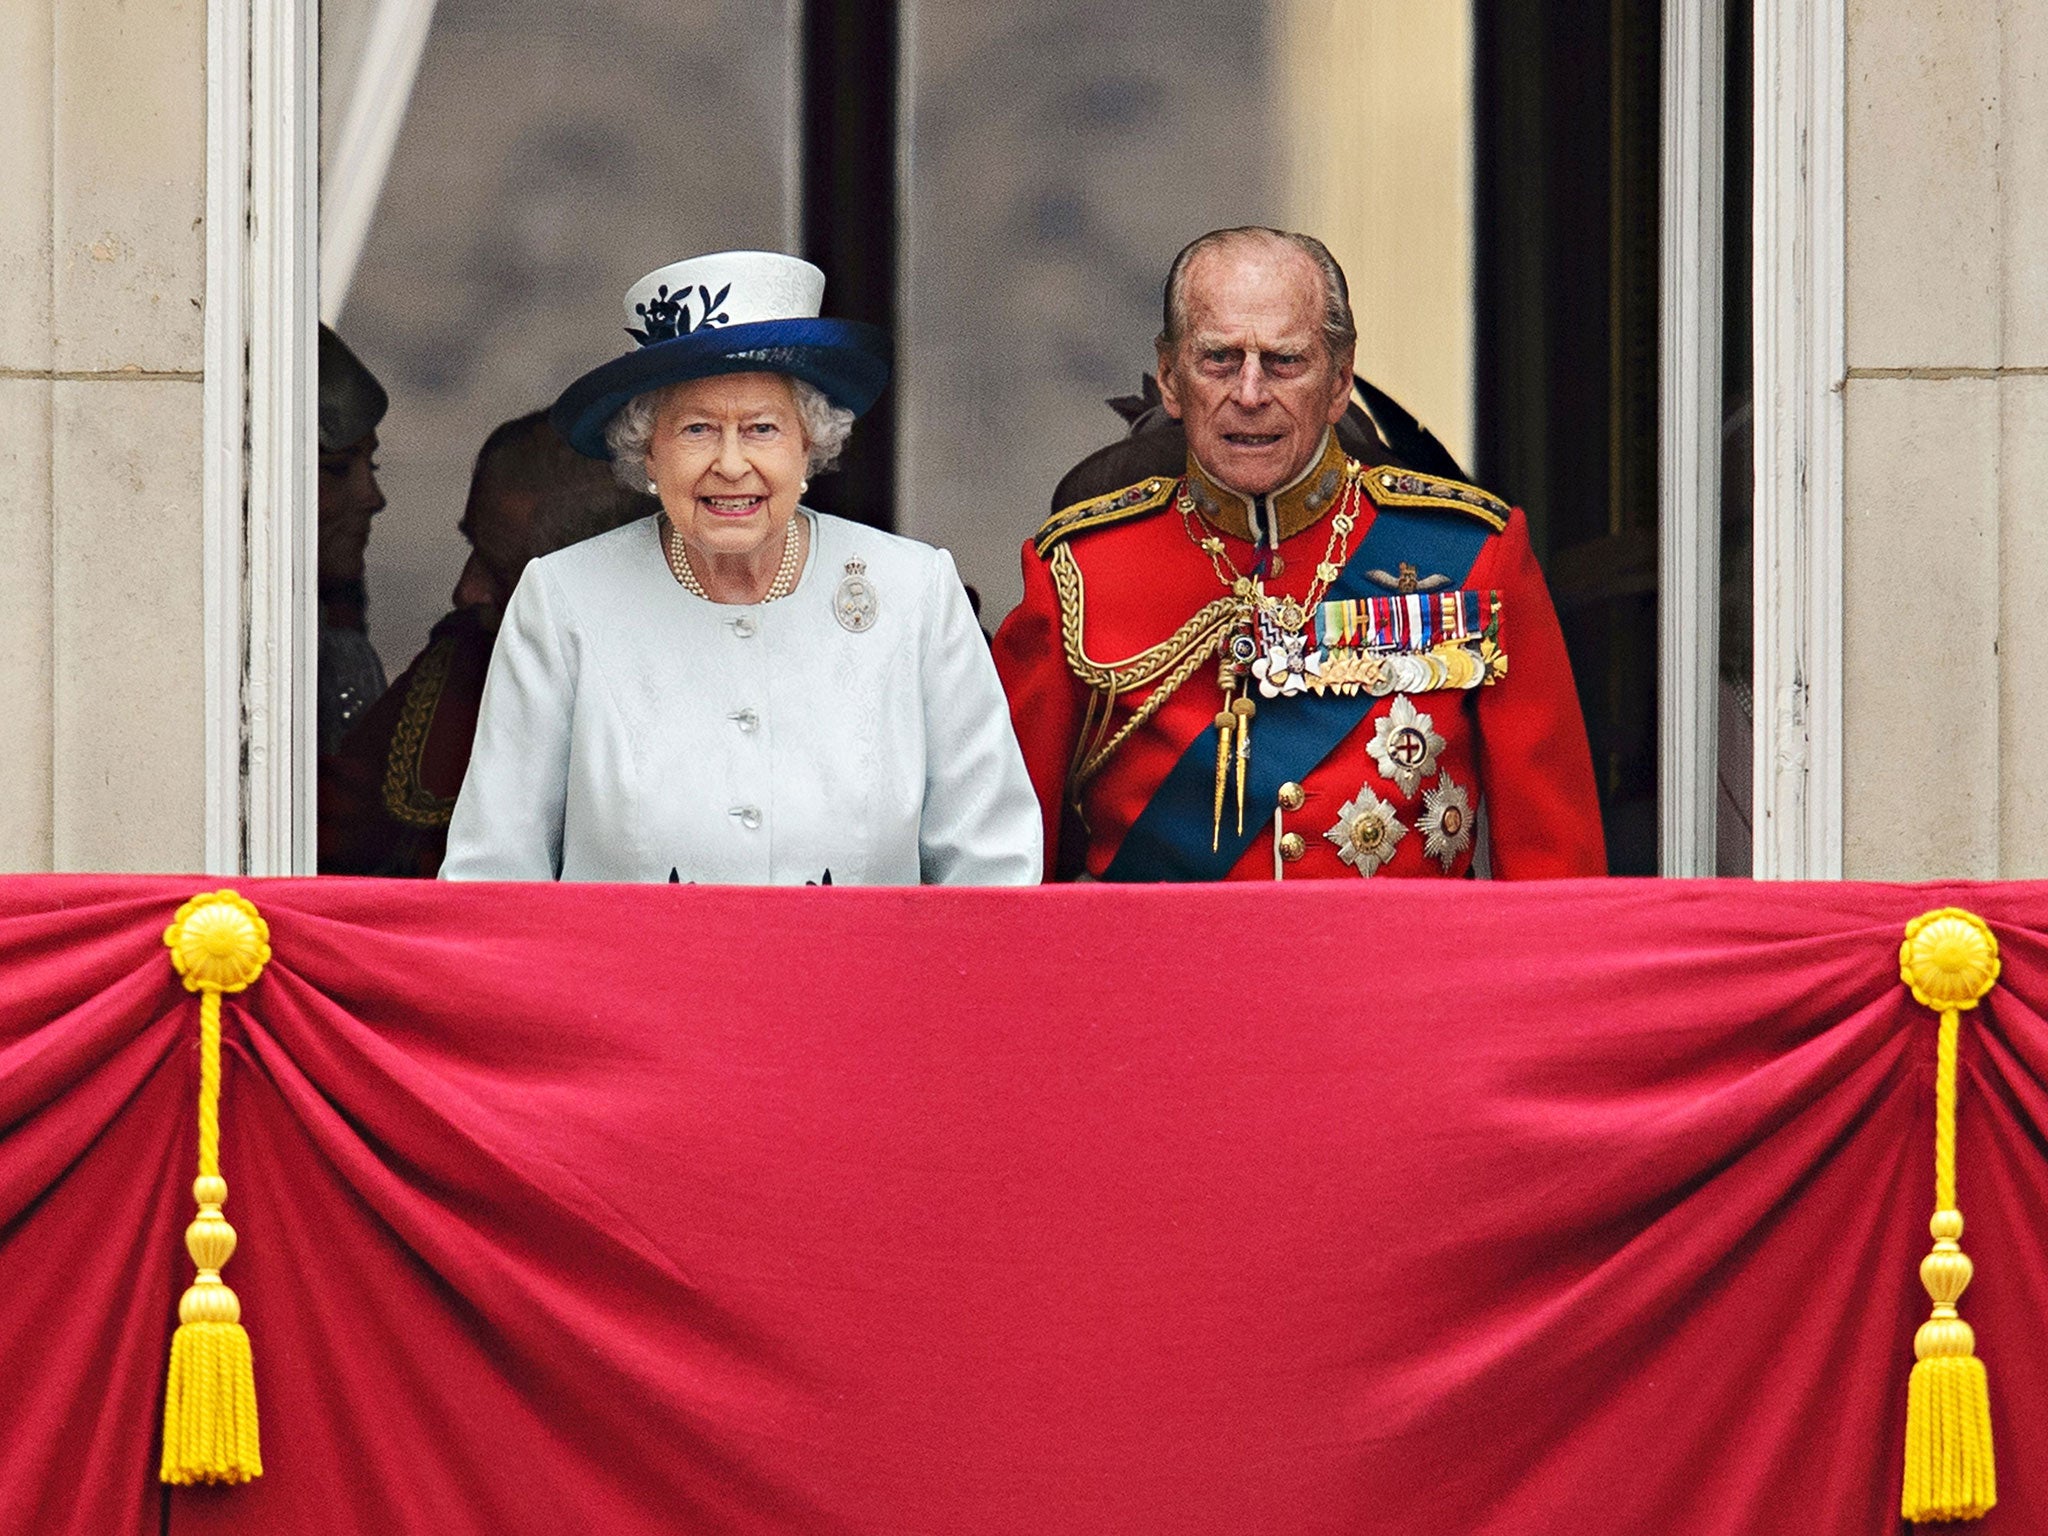 The Queen and Prince Philip on the balcony of Buckingham Palace